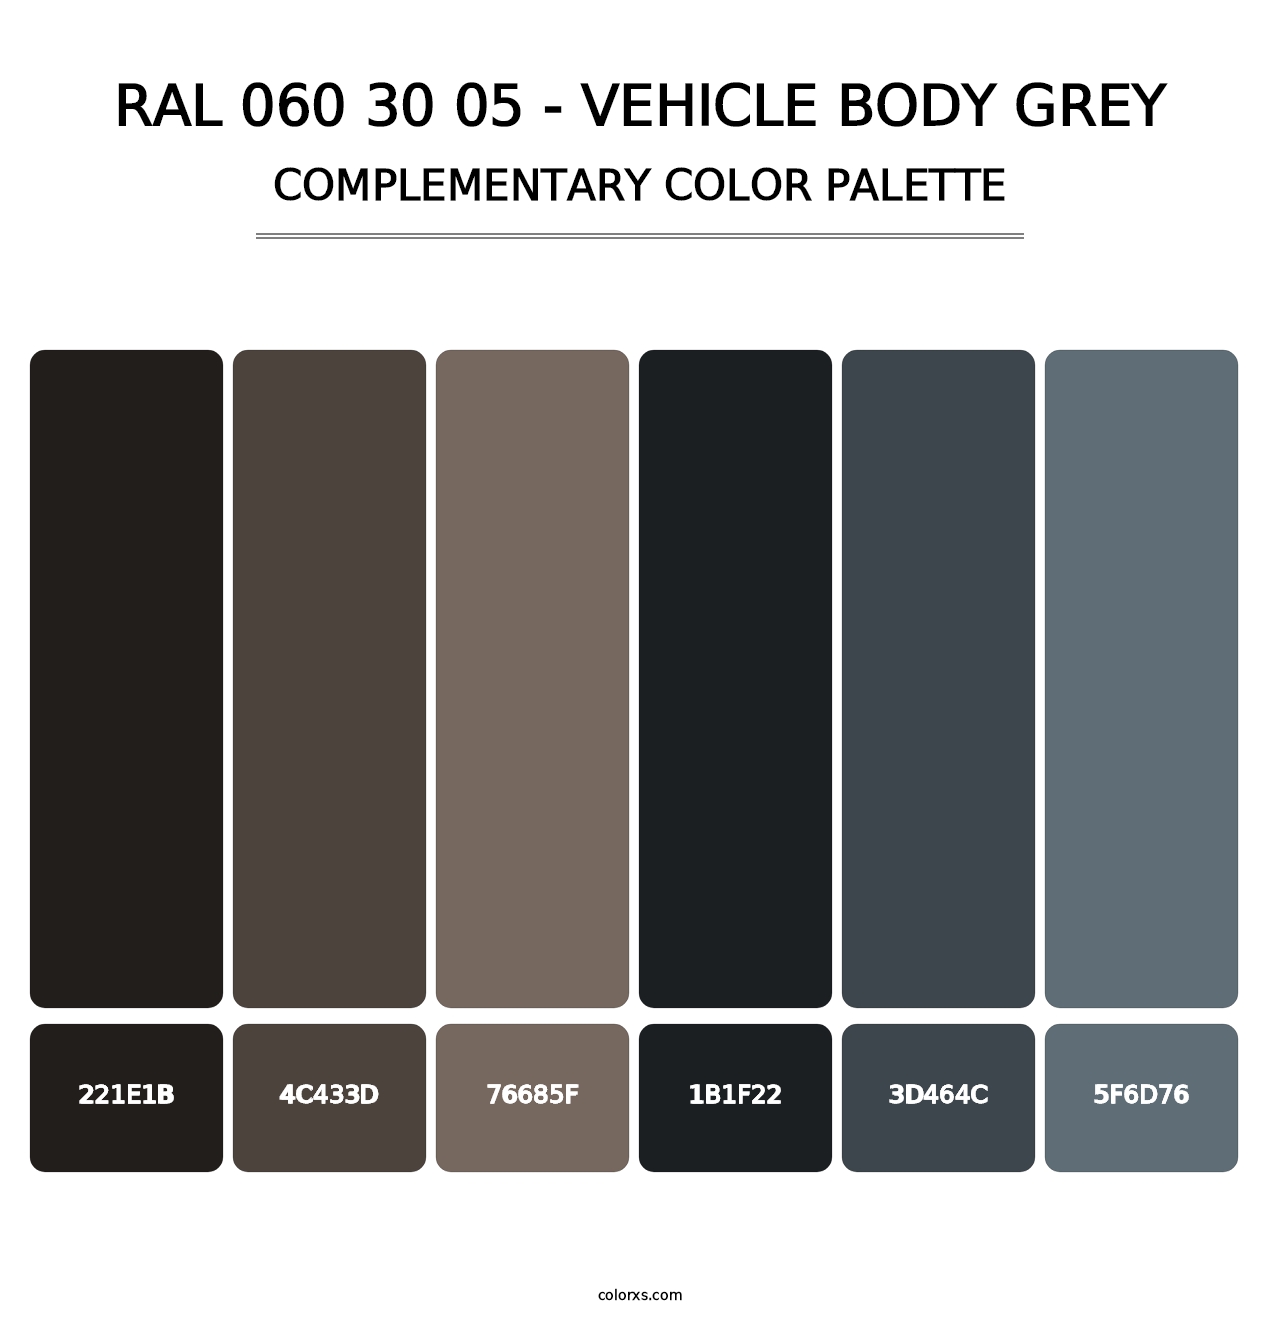 RAL 060 30 05 - Vehicle Body Grey - Complementary Color Palette